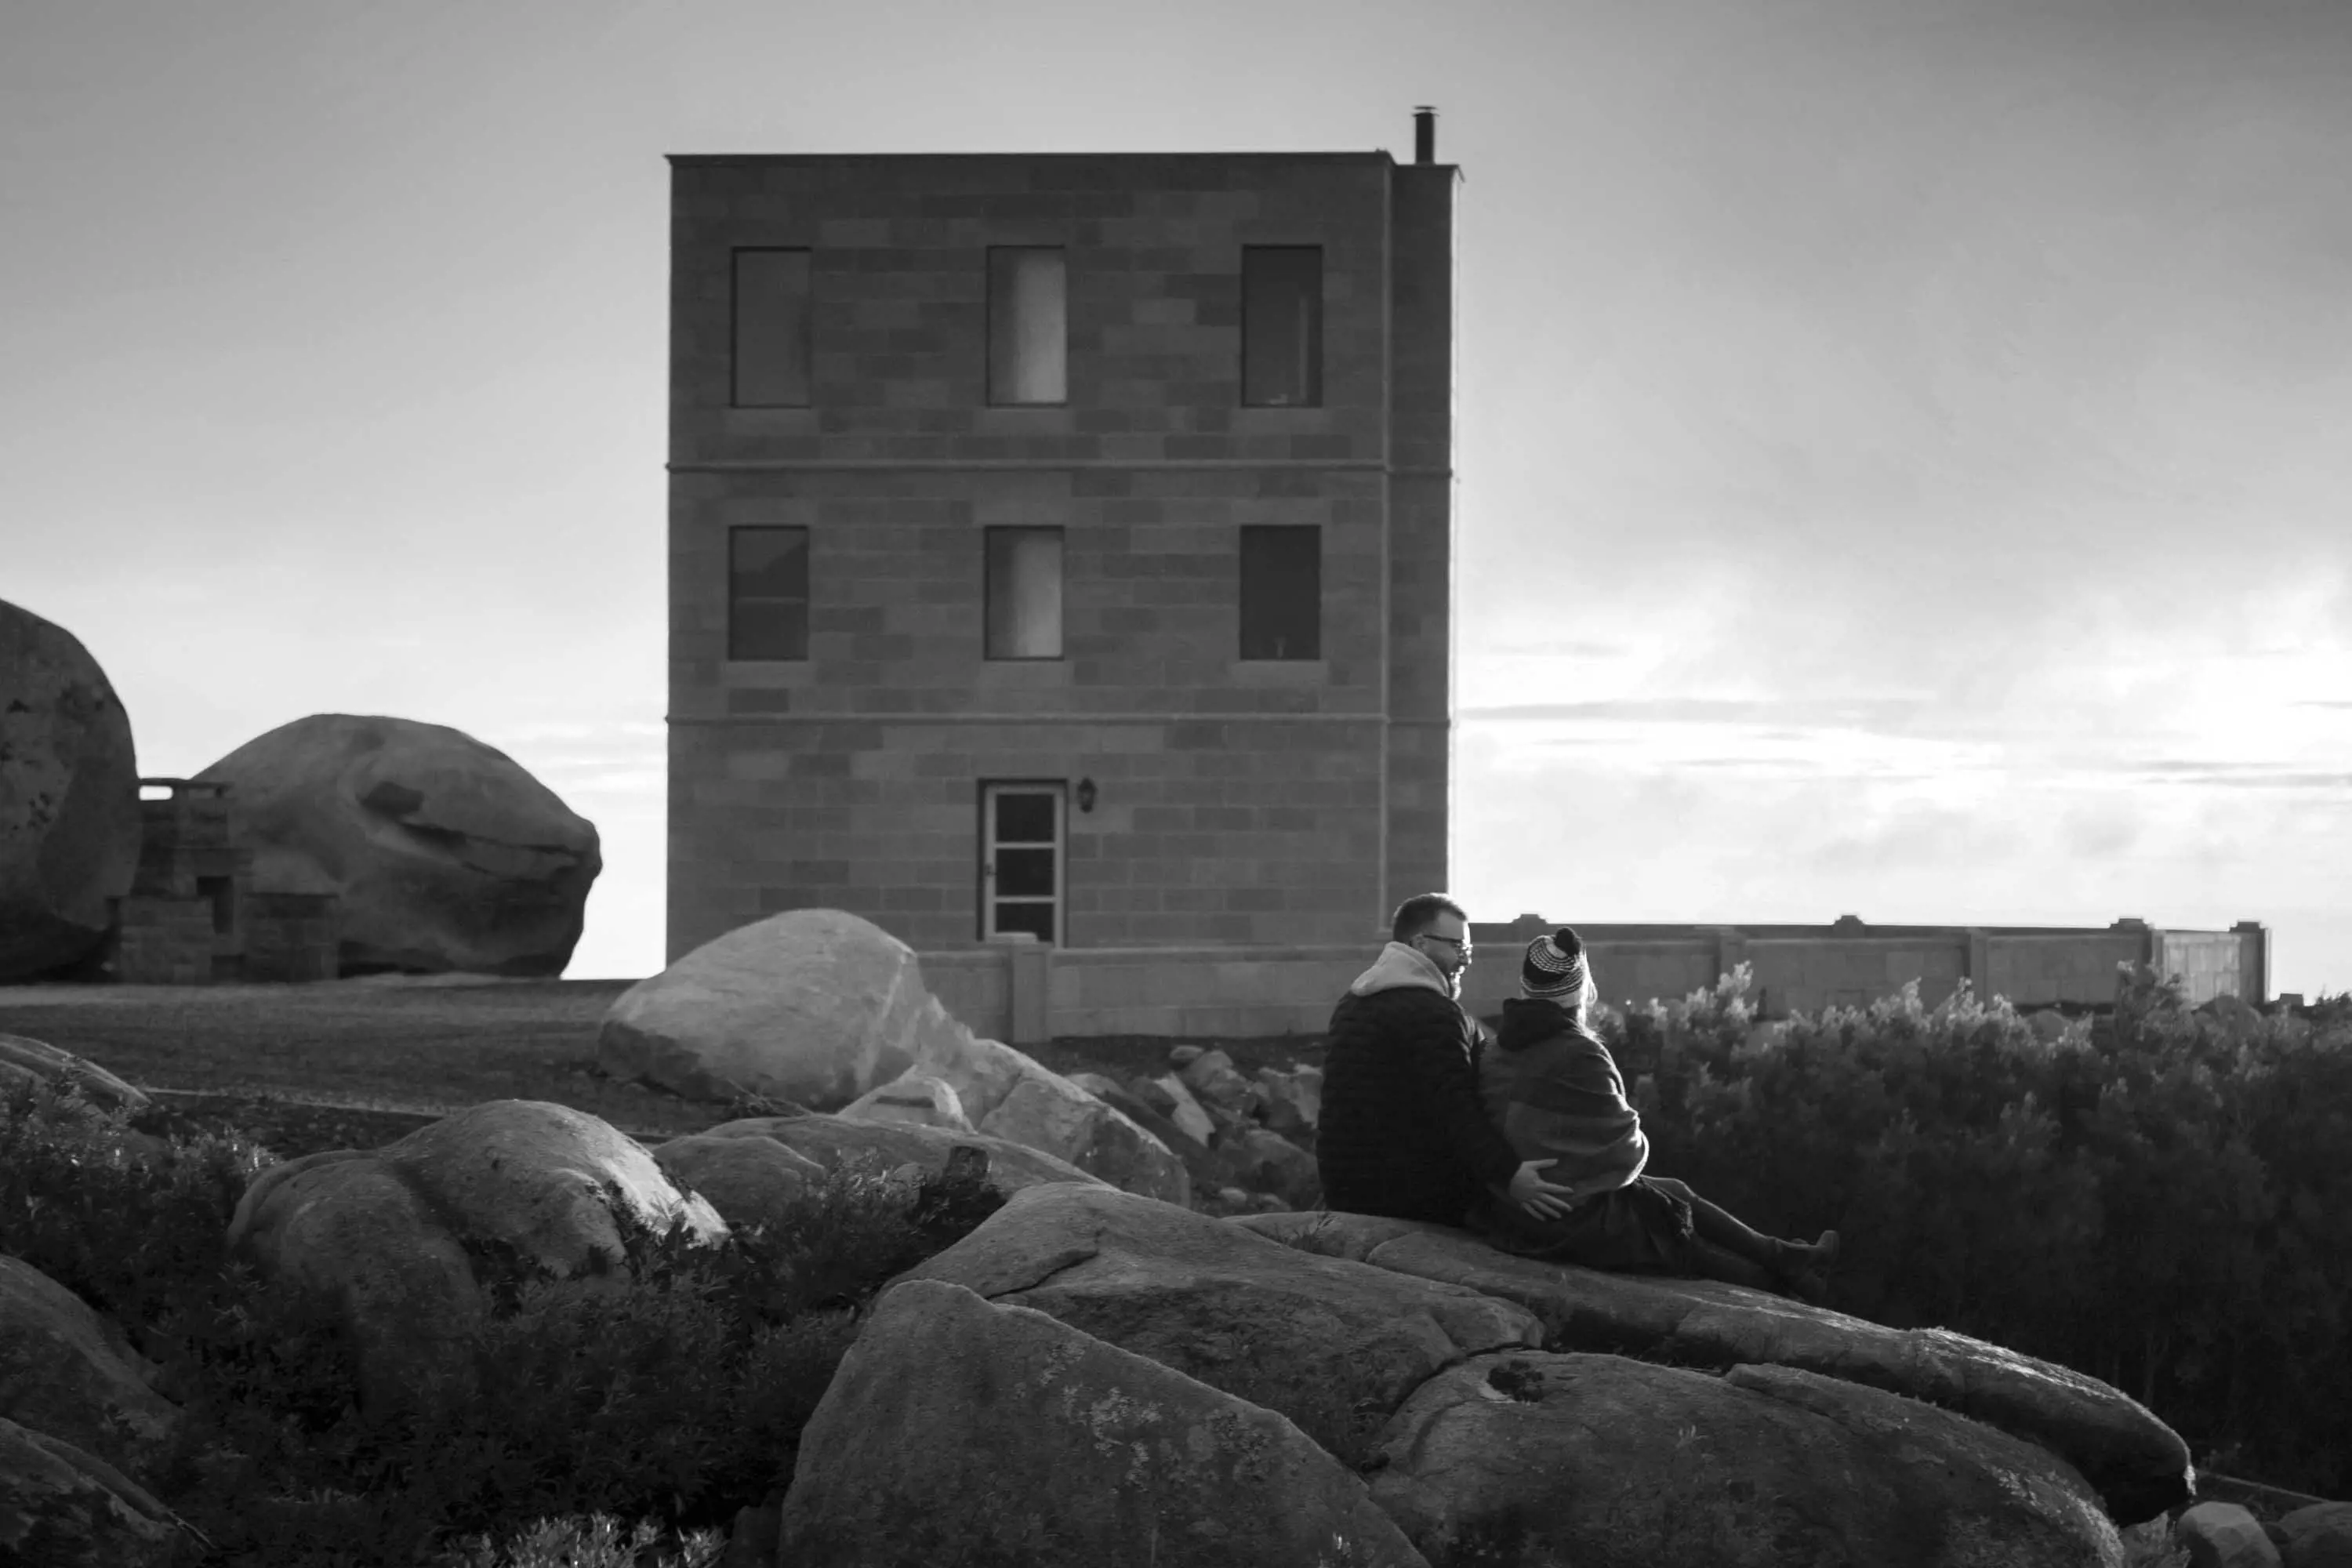 A tall, square, sandstone building stands on a plateau surrounded by large boulders. A young couple are seated in the middle ground on a rock.